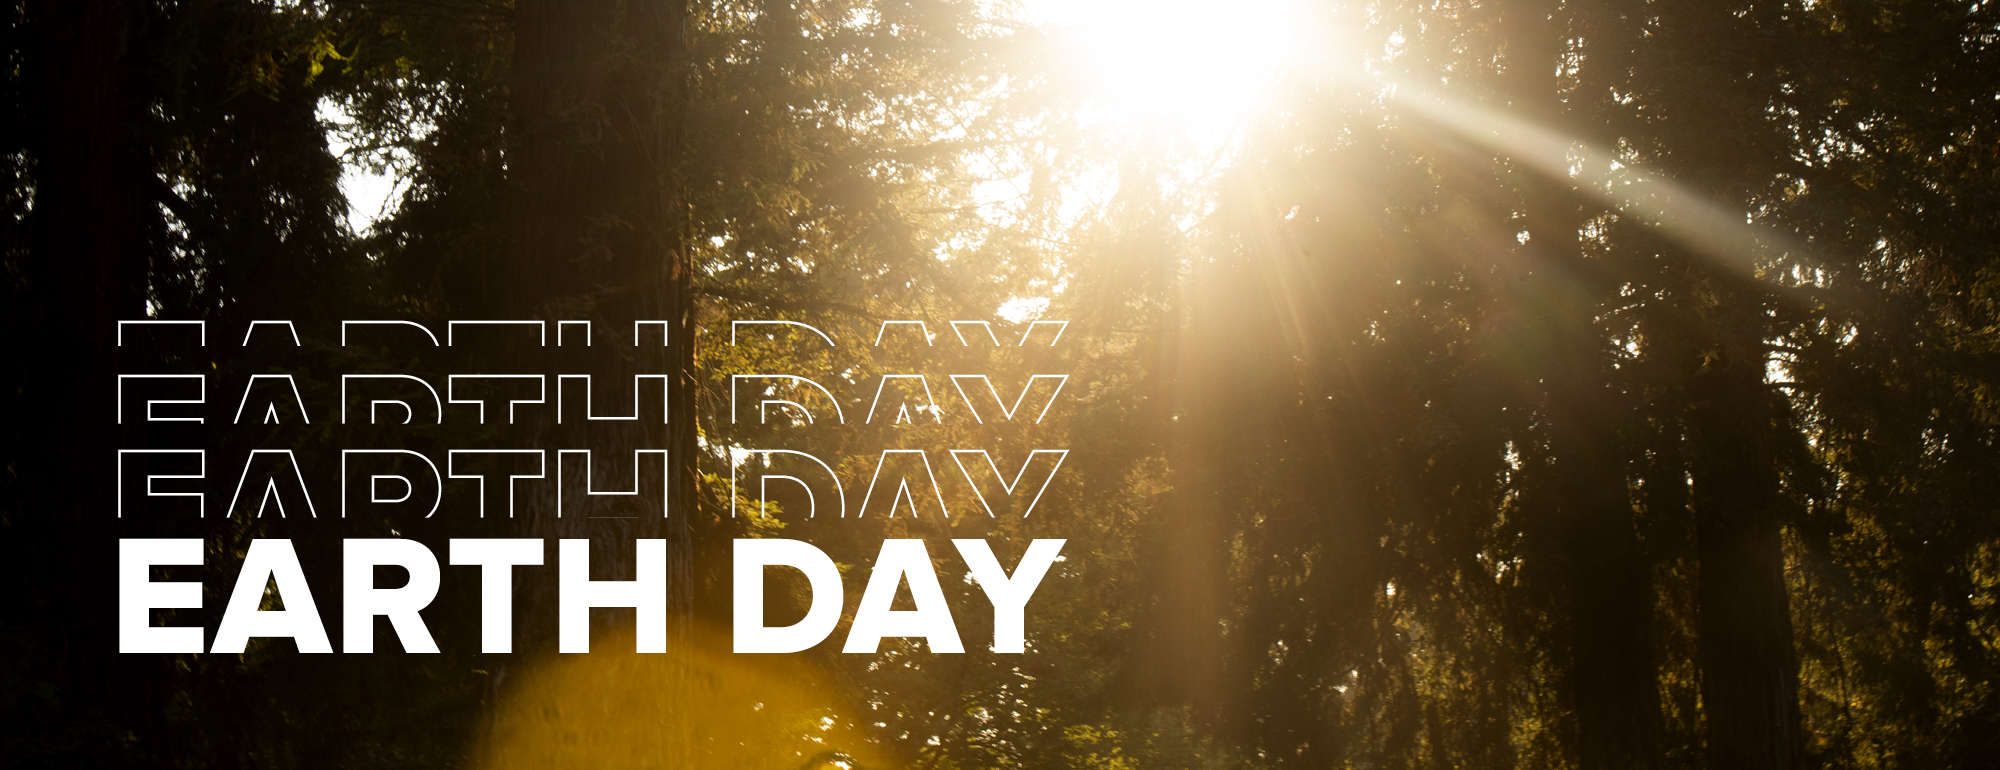 Photo of the sun shining through trees with text that reads "Earth Day"